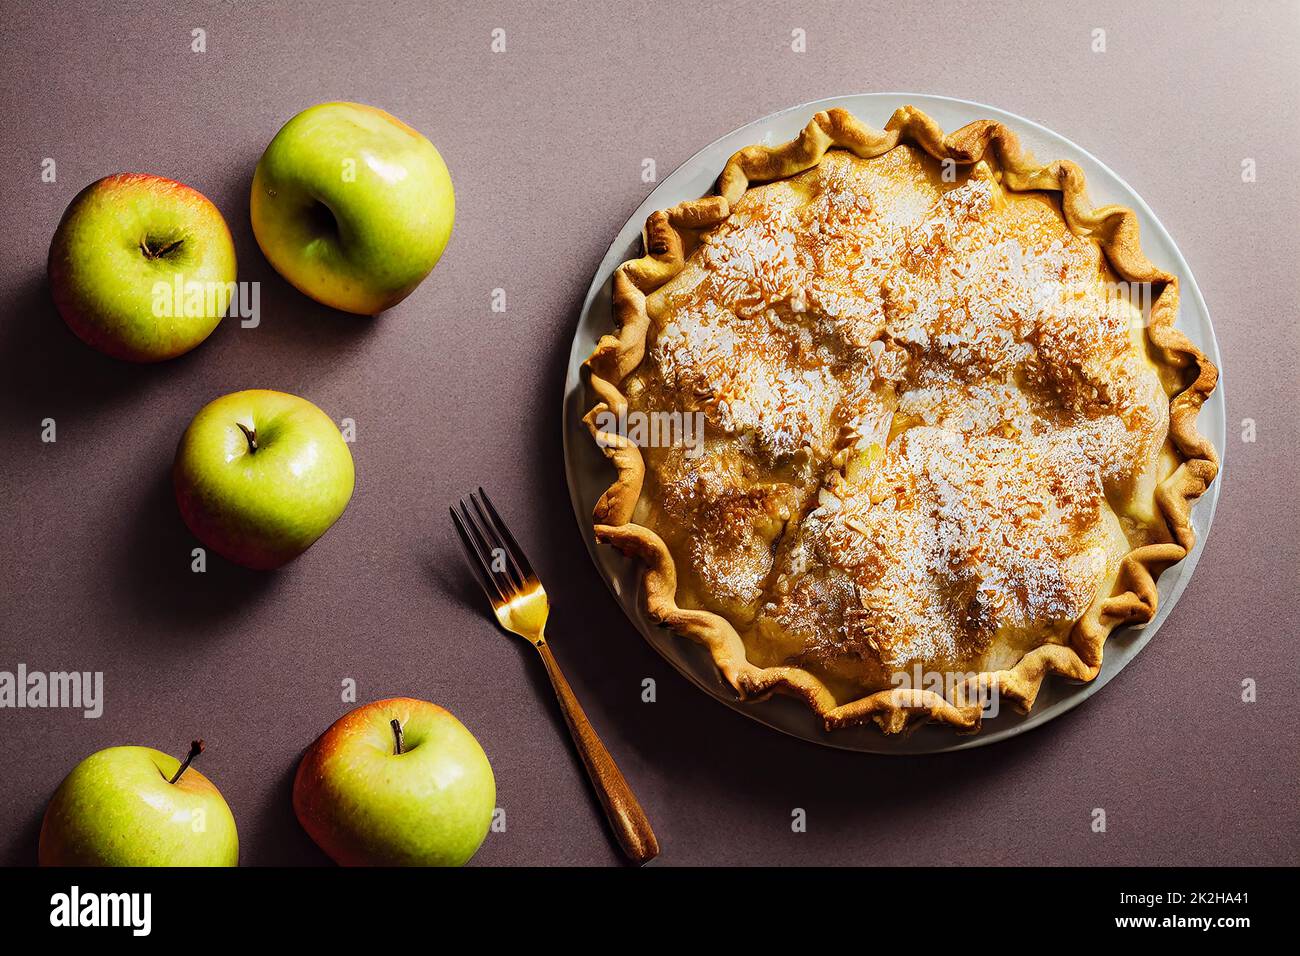 Sweet apple pie with golden crust fresh apples and decor on the table, gray background, dramatic lighting, food photography and illustration Stock Photo